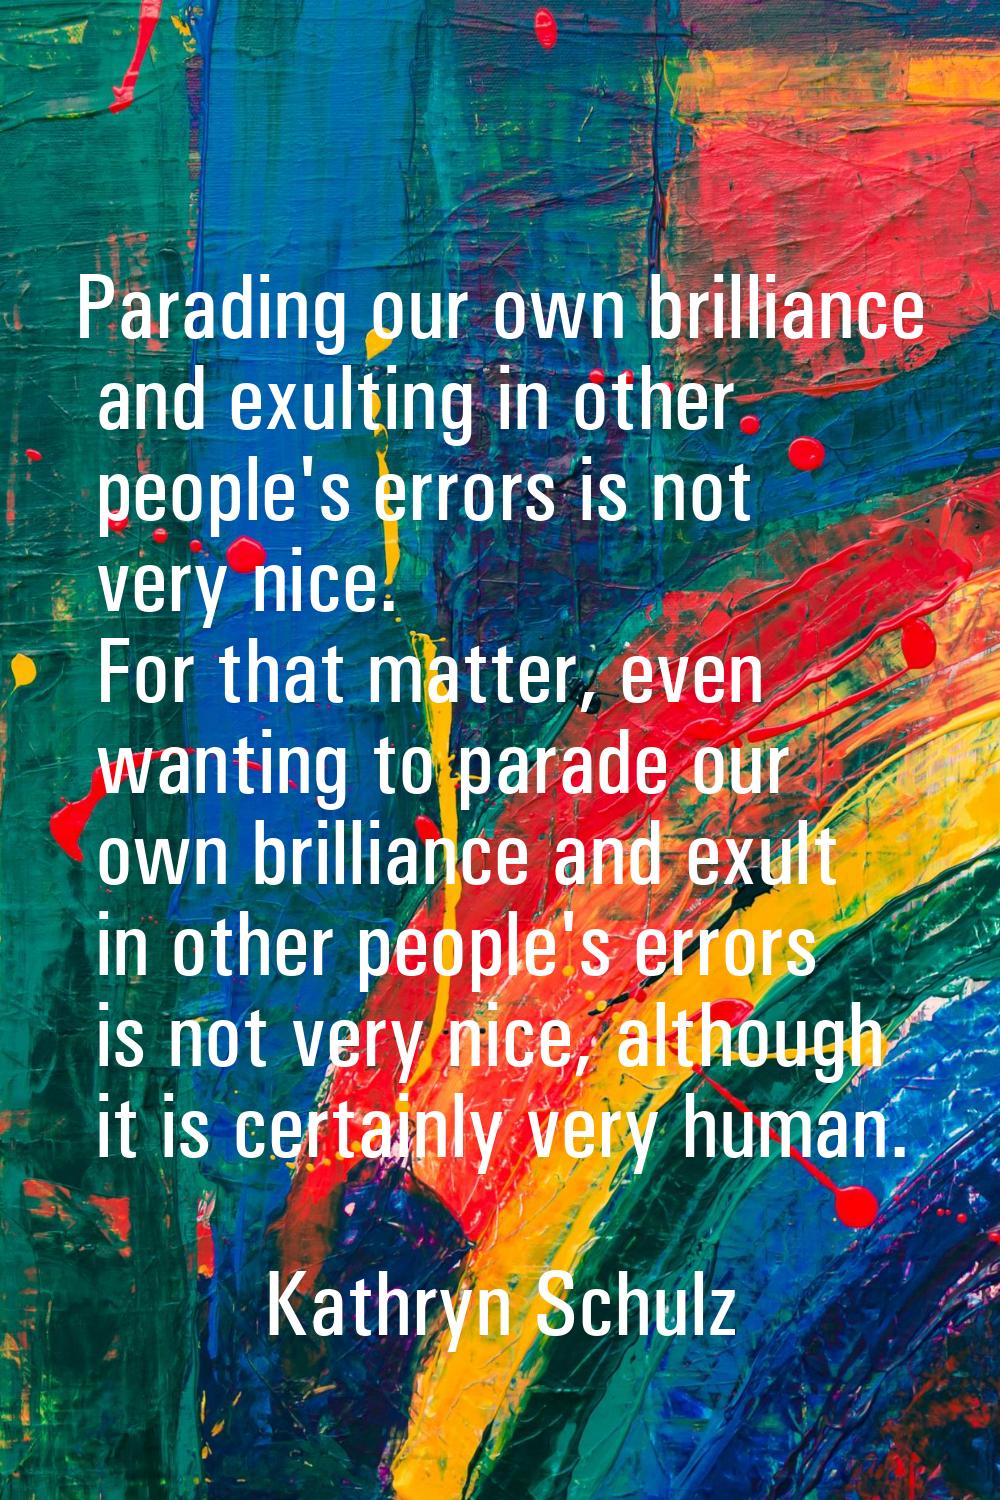 Parading our own brilliance and exulting in other people's errors is not very nice. For that matter